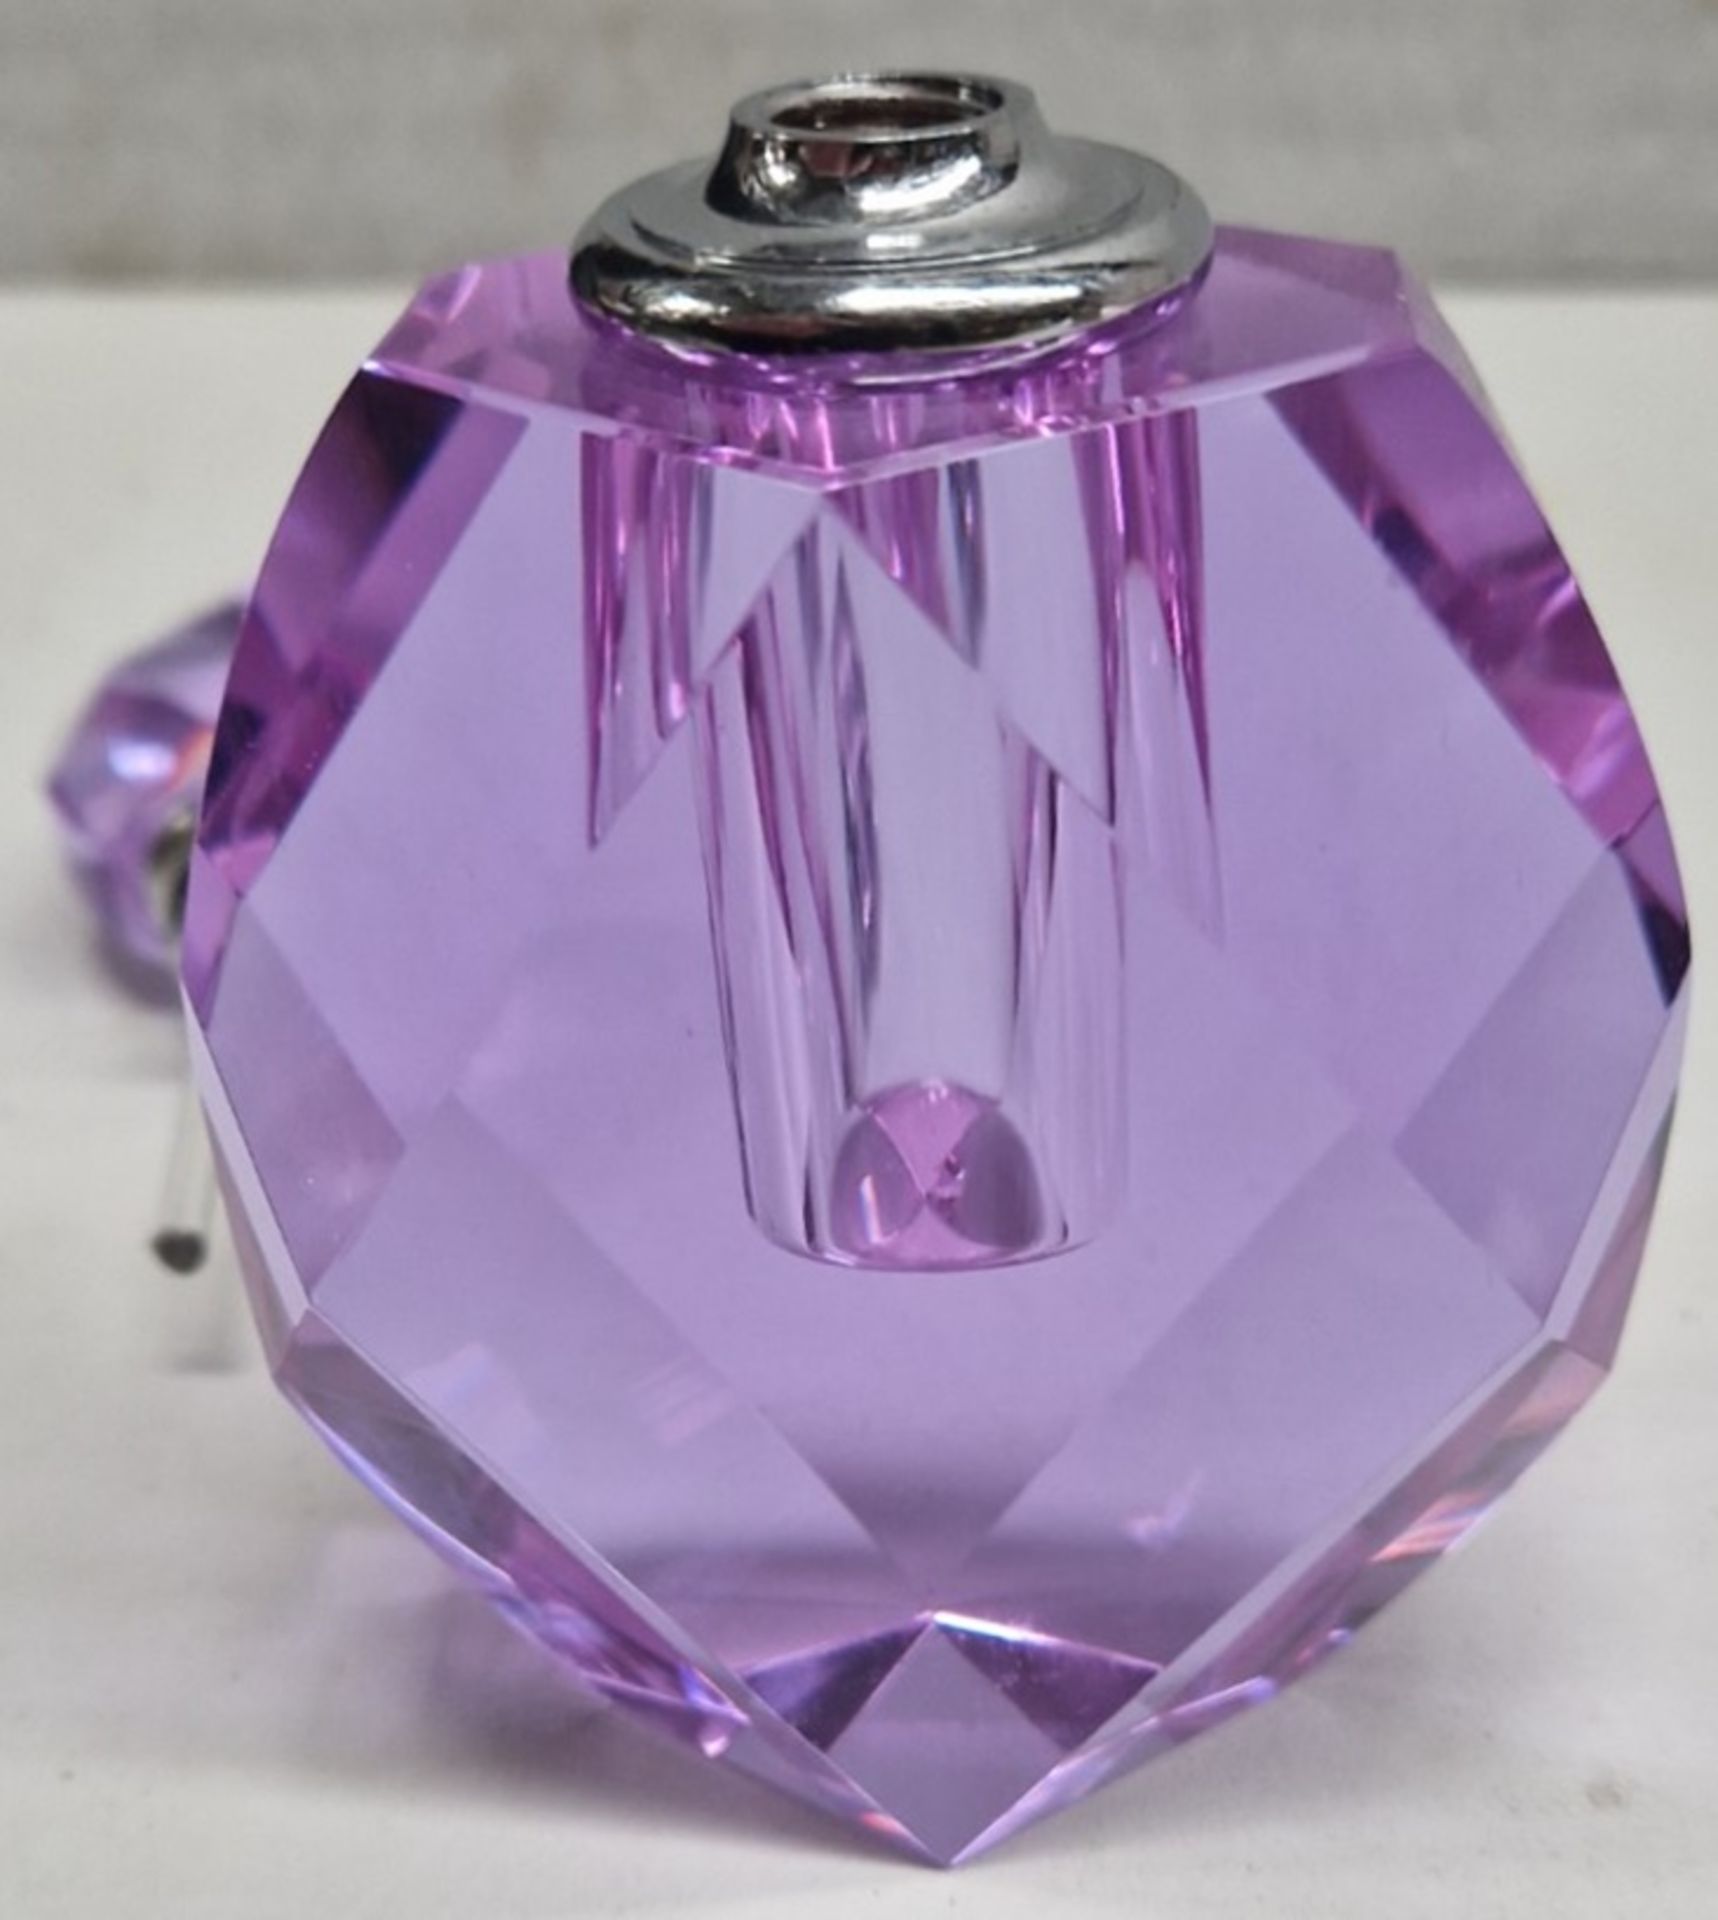 1 x Beautiful Purple Crystal Glass Perfume Bottle With Dauber And Threaded Stopper - Image 6 of 6